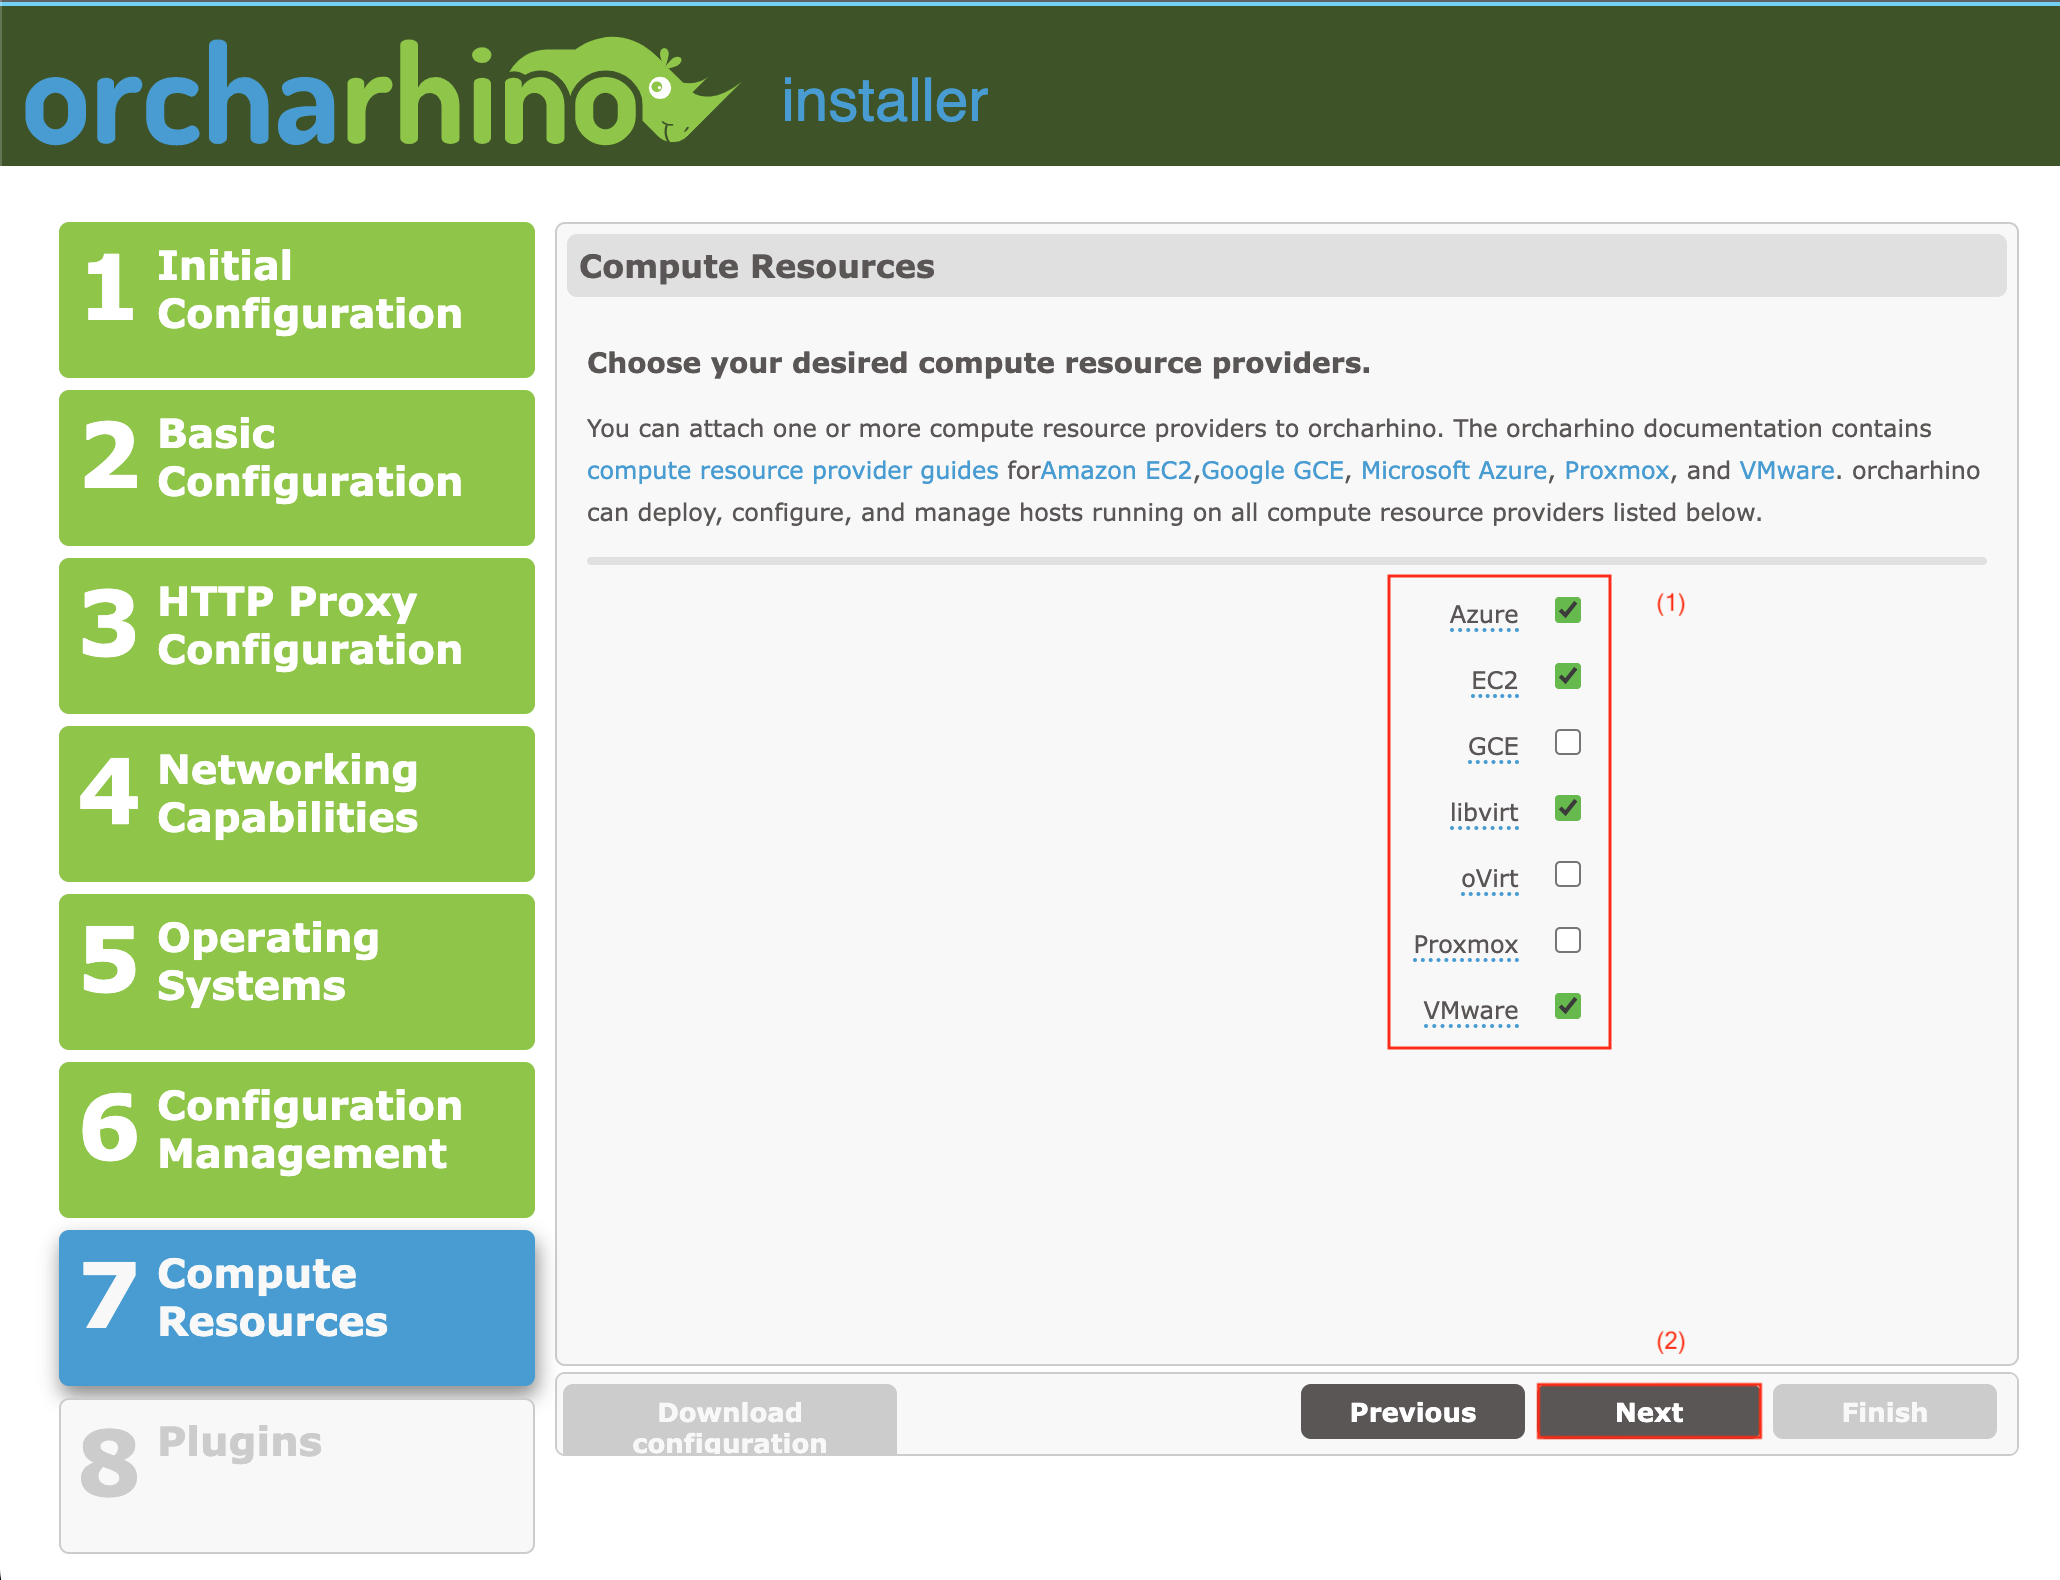 Selecting compute resources in orcharhino Web Installer